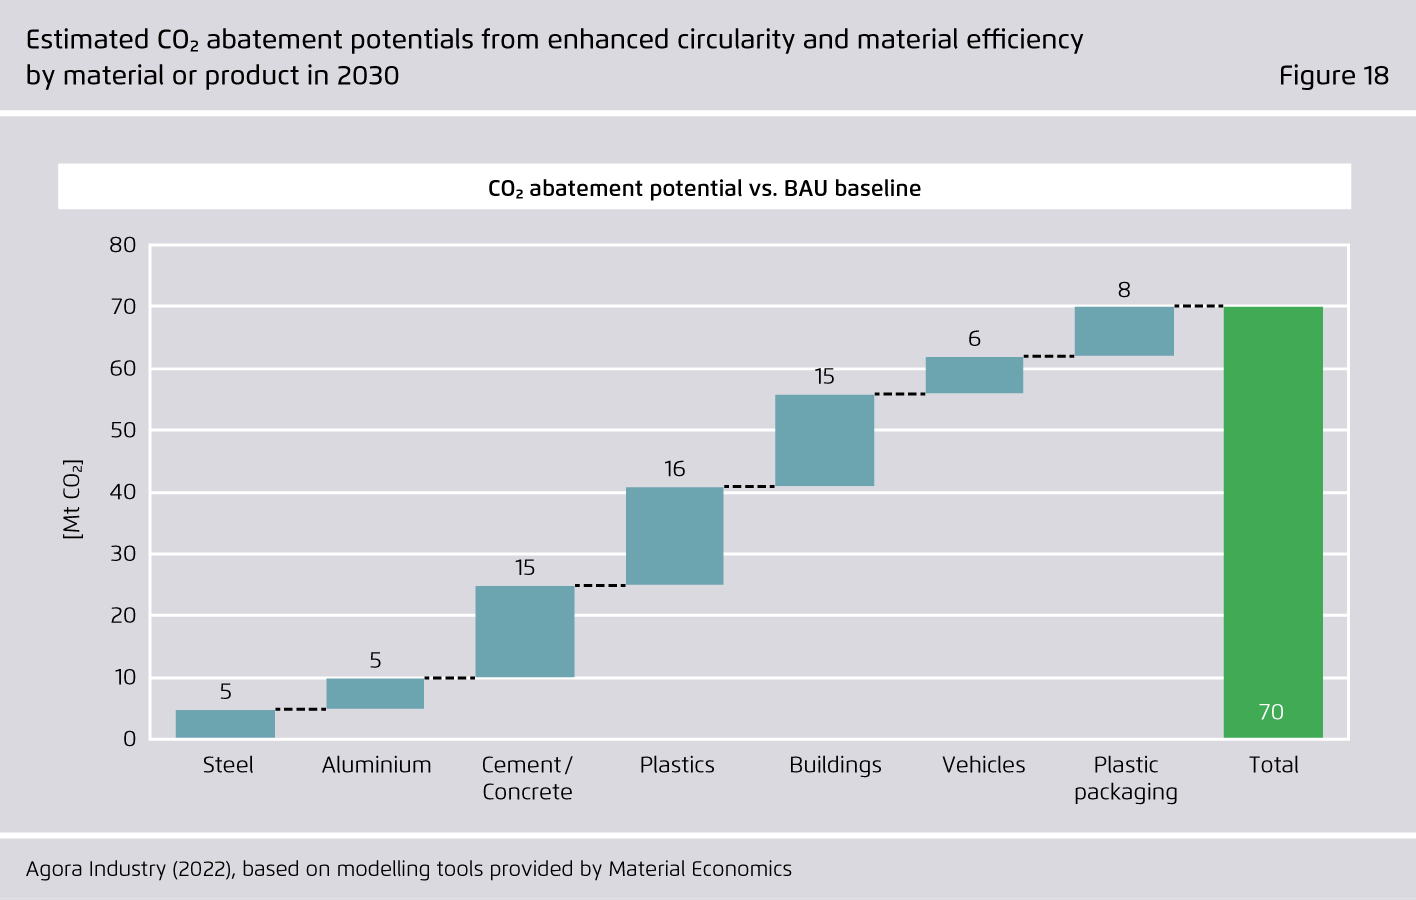 Preview for Estimated CO₂ abatement potentials from enhanced circularity and material effciency by material or product in 2030